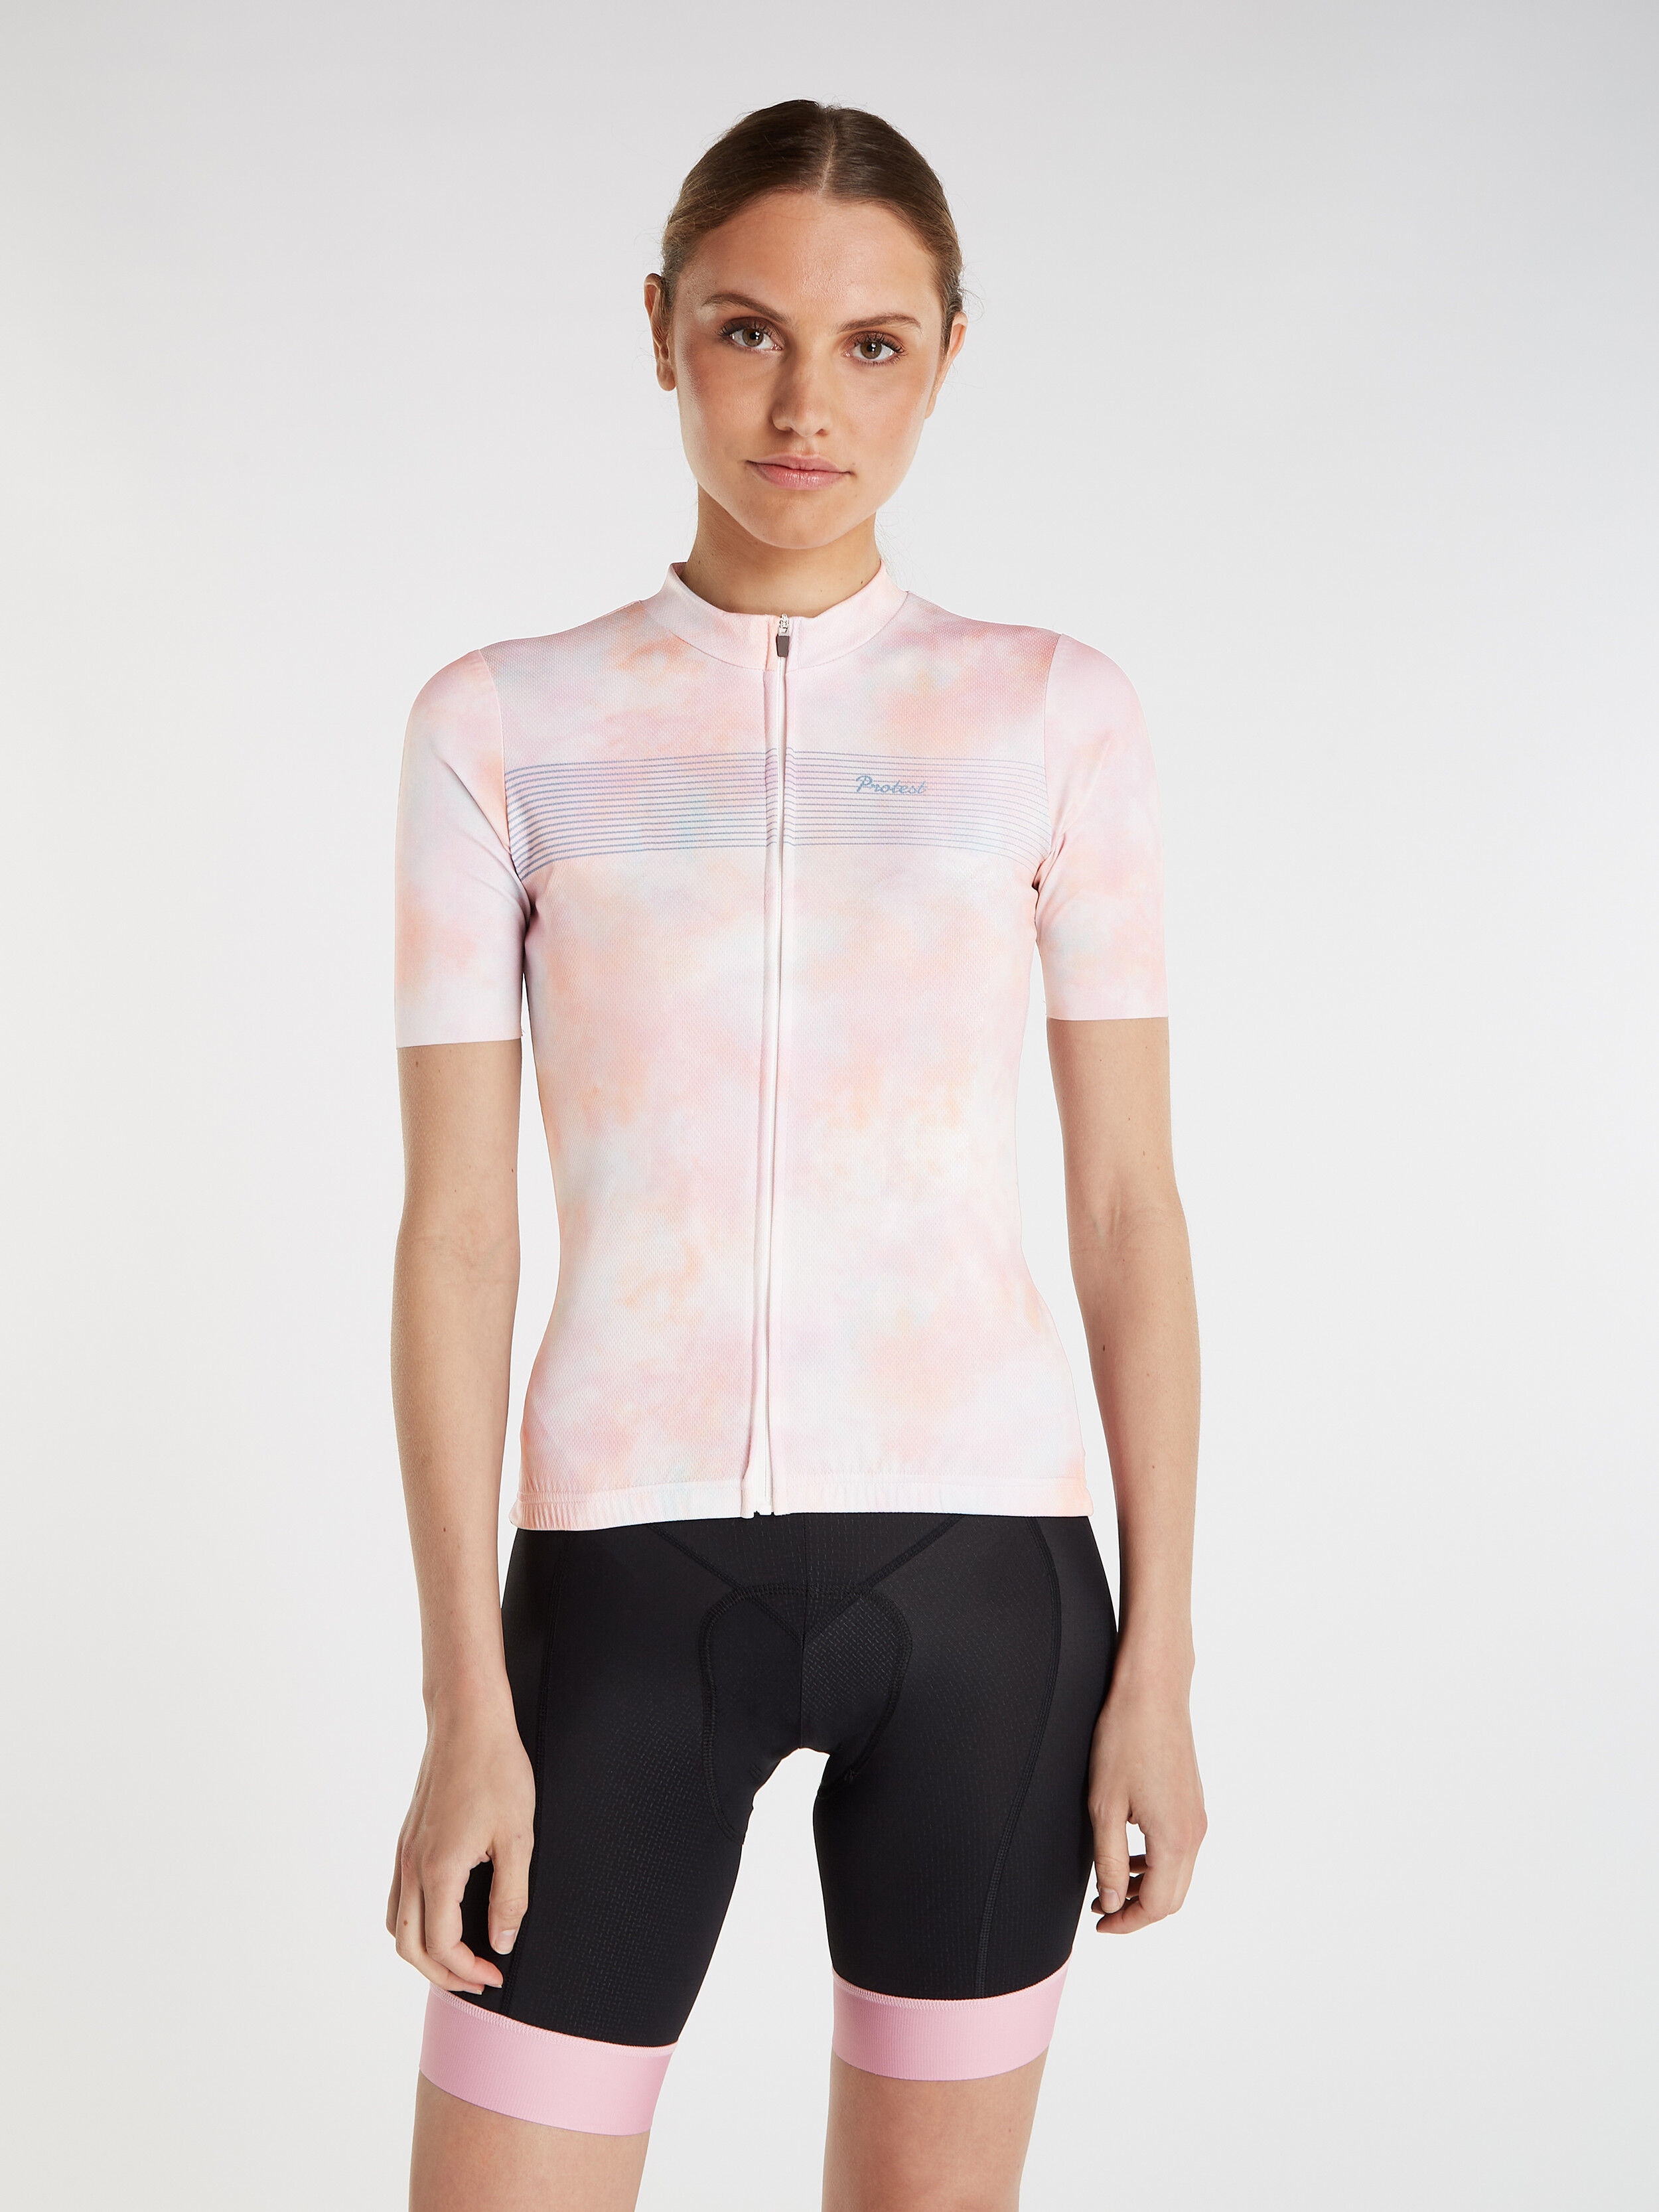 Protest Prtoat - Cycling jersey - Women's | Hardloop